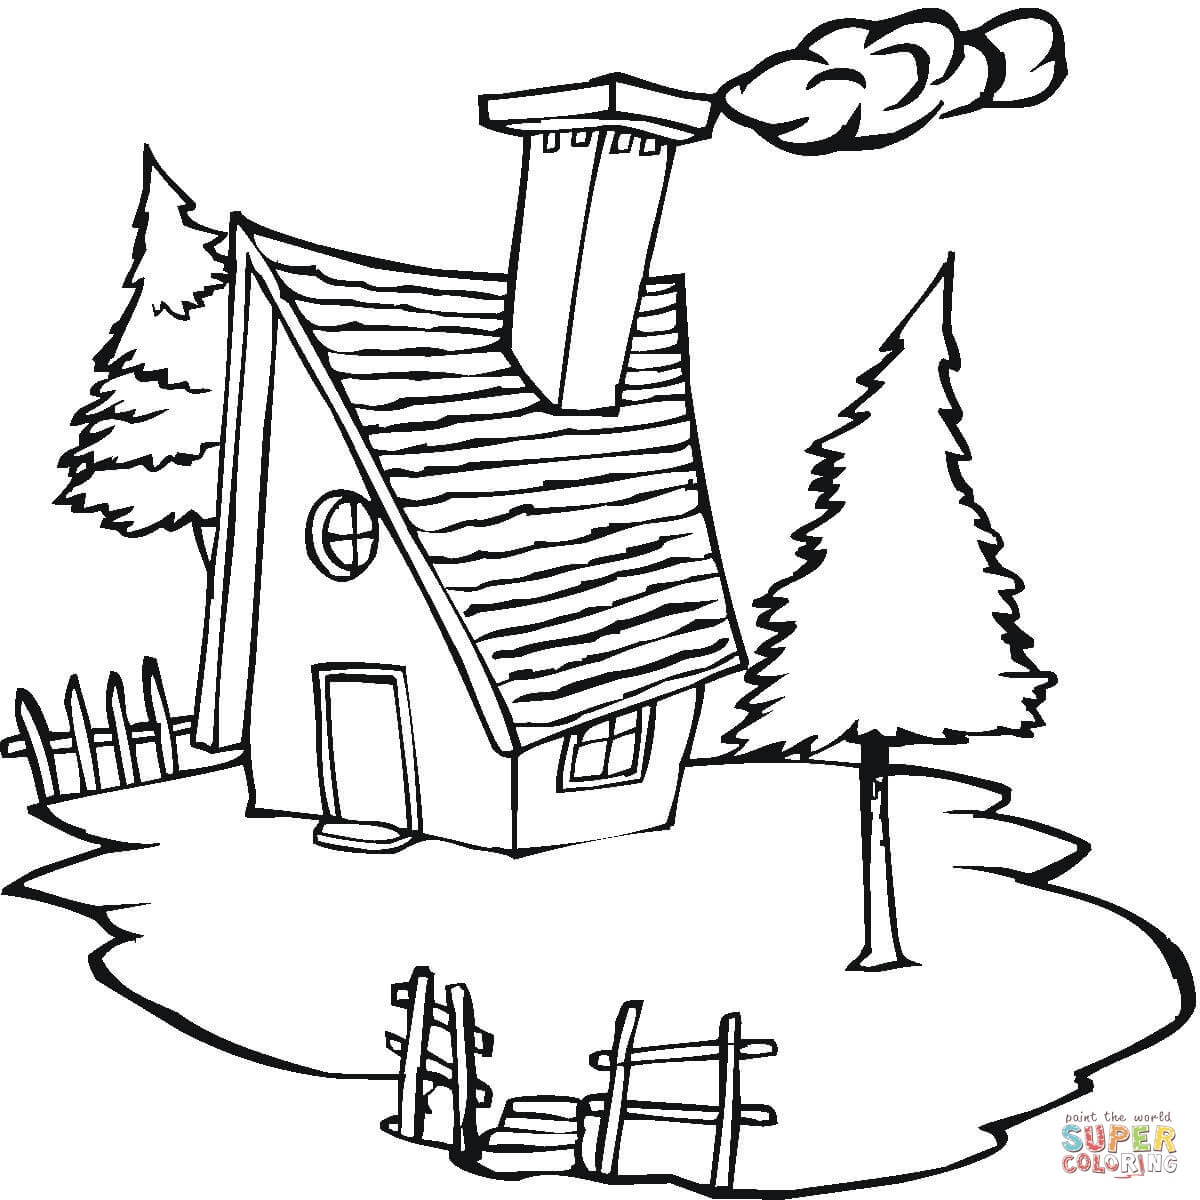 Village coloring, Download Village coloring for free 2019